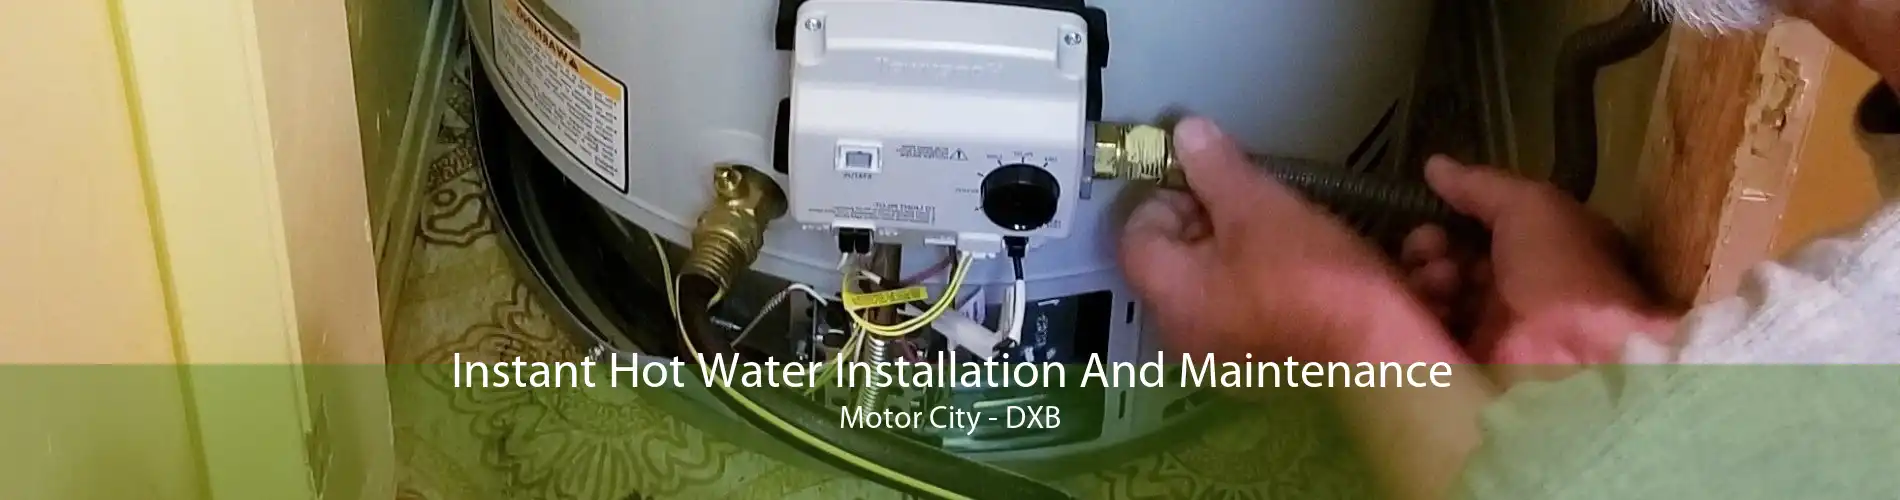 Instant Hot Water Installation And Maintenance Motor City - DXB